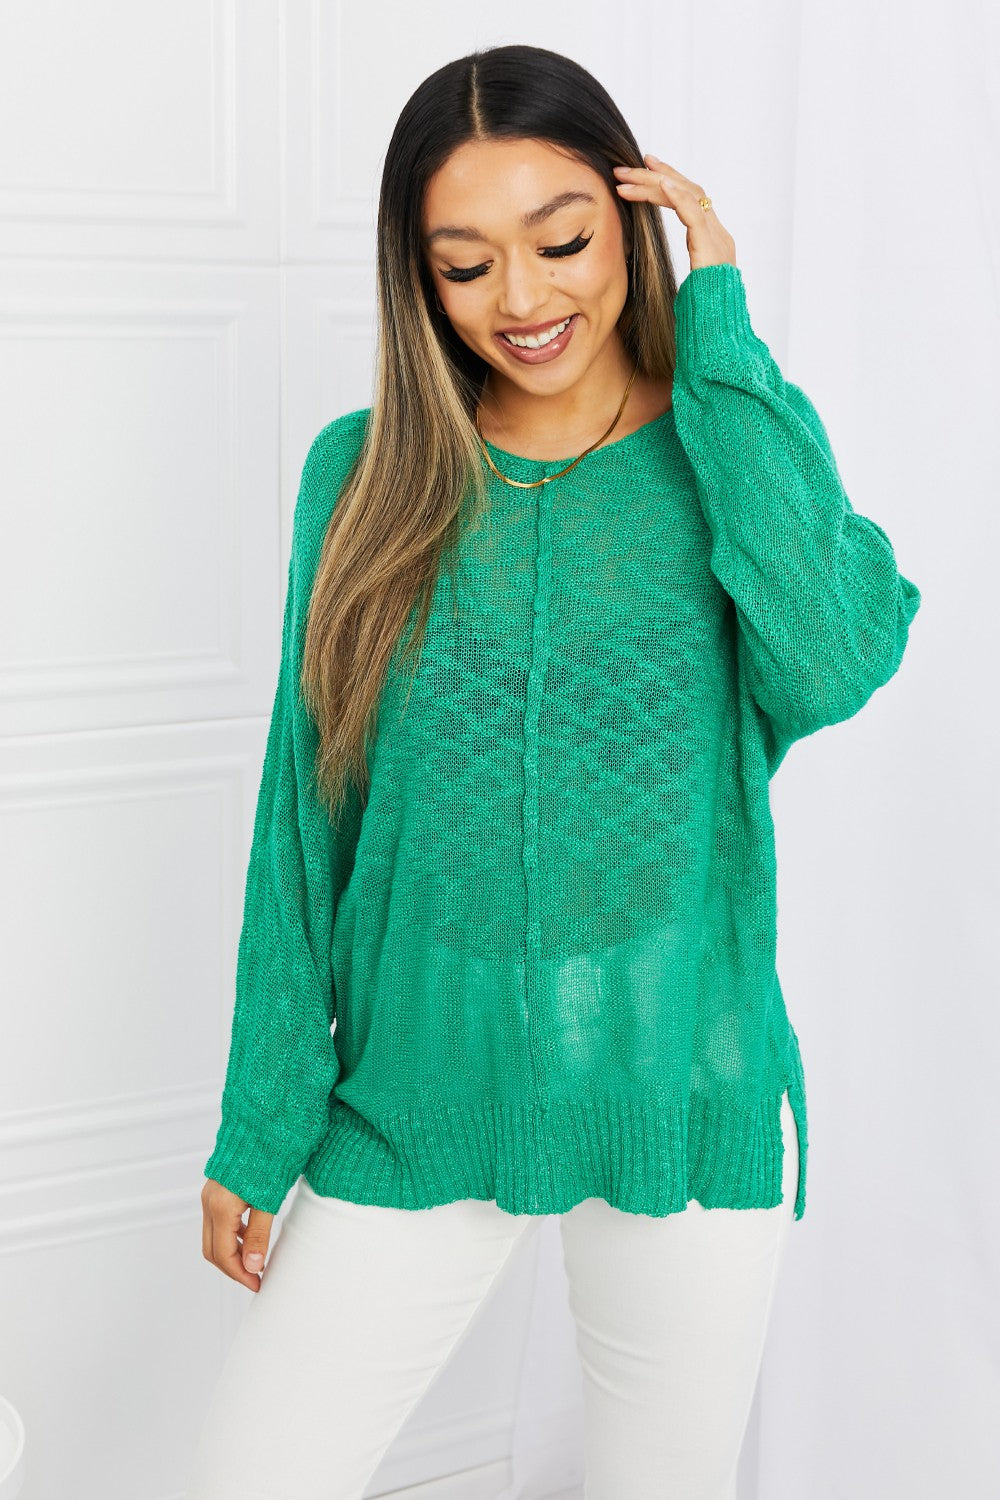 BACK TO COLLEGE    Exposed Seam Slit Knit Top in Kelly Green